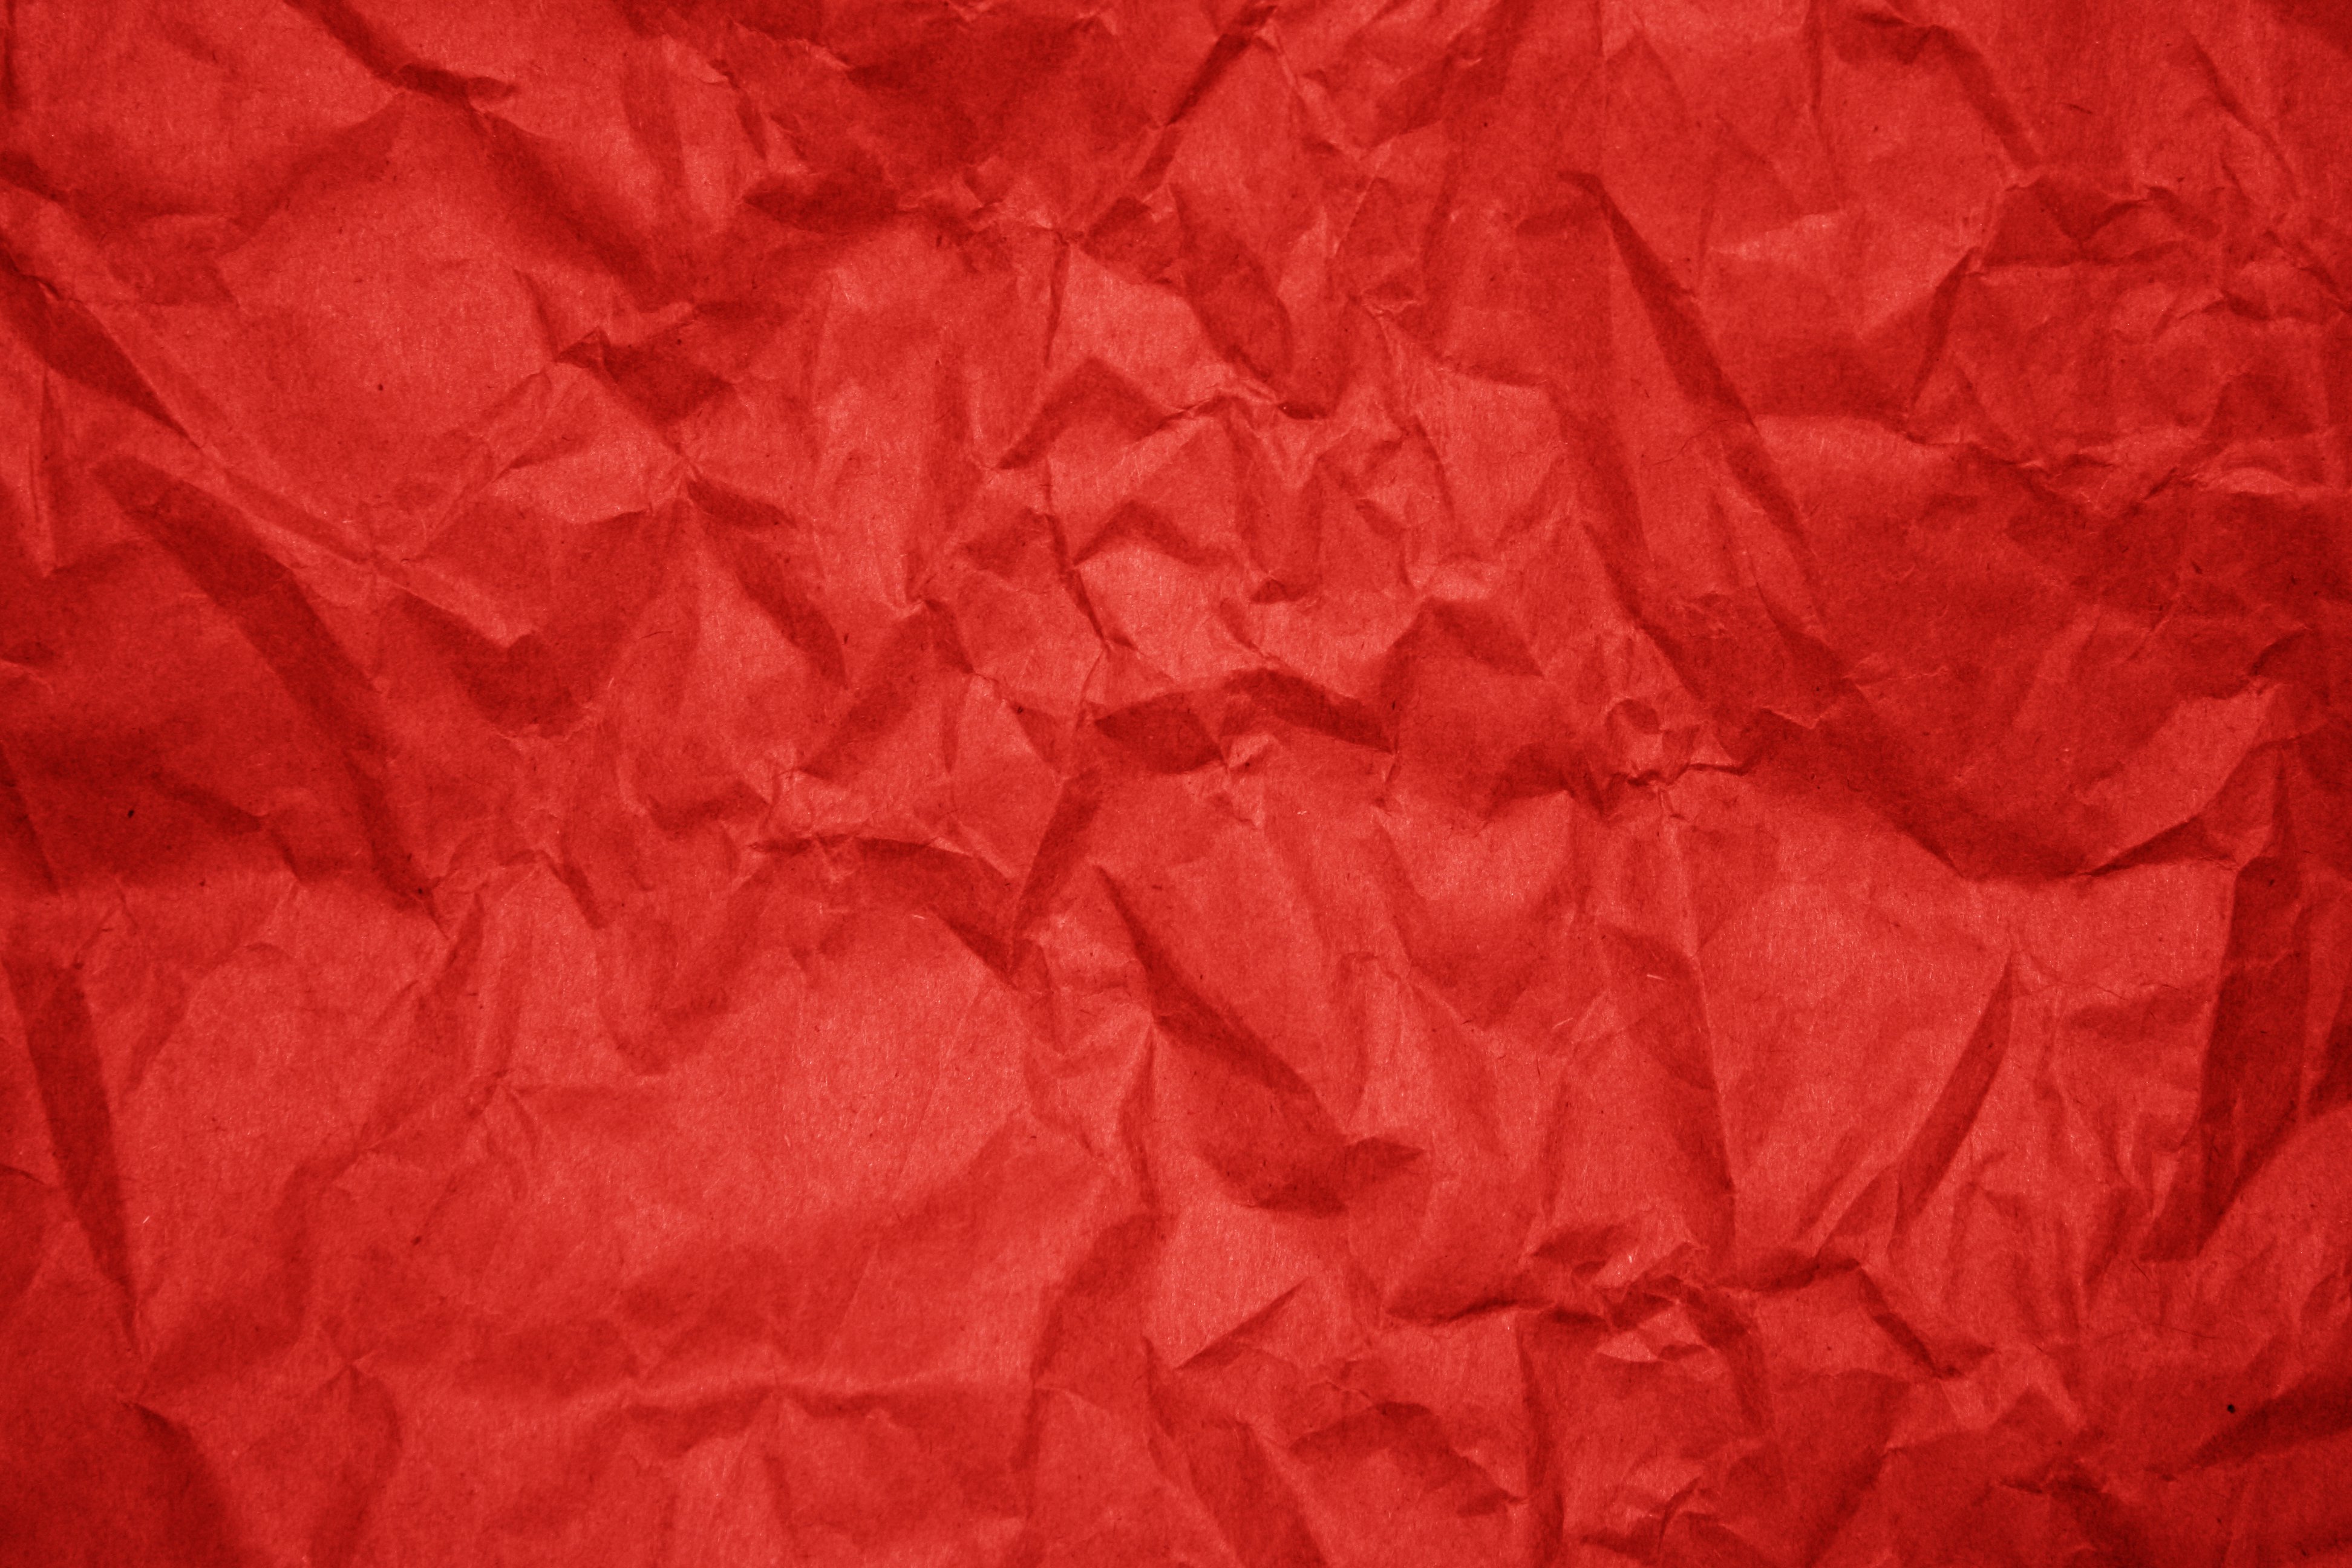 Crumpled Red Paper Texture Picture, Free Photograph